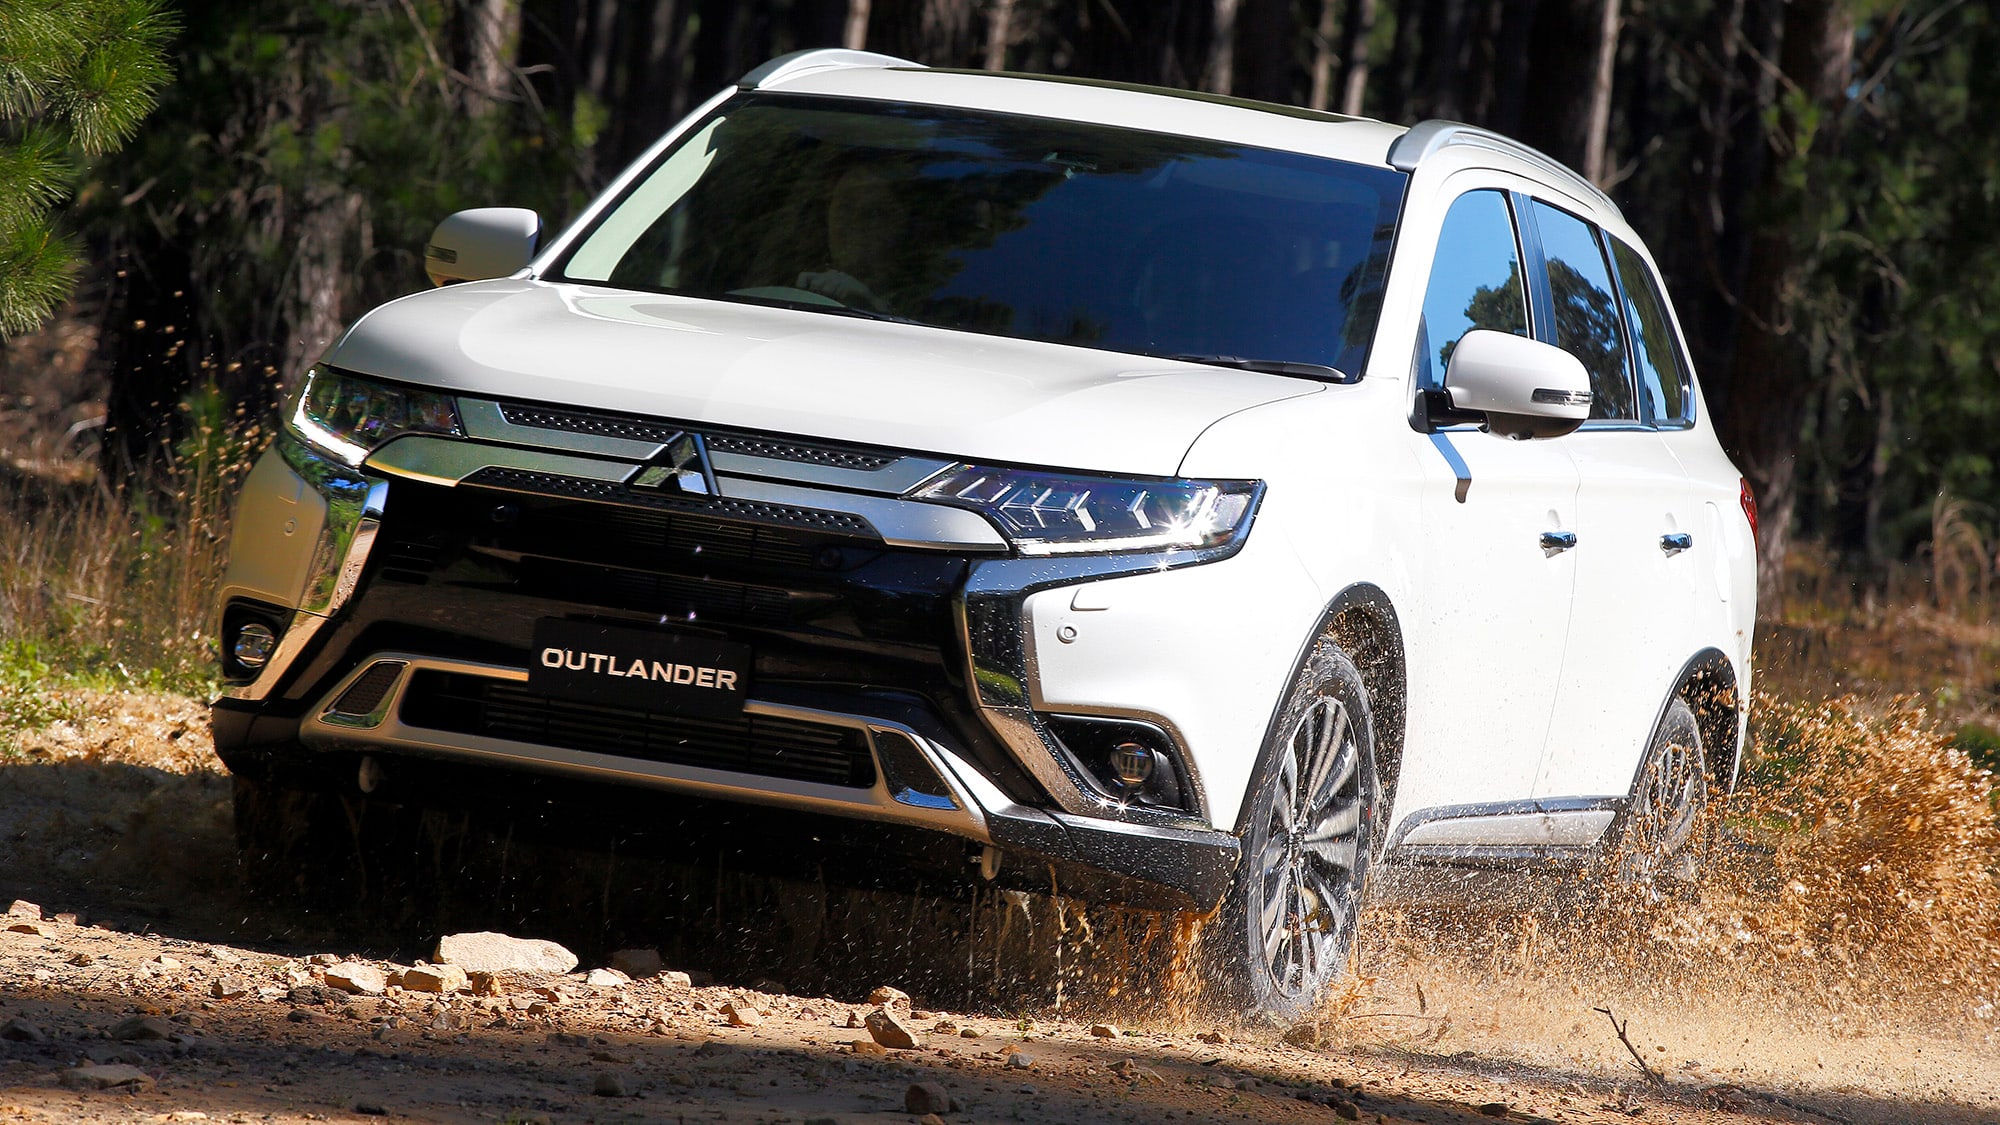 26 HQ Images Mitsubishi Outlander Sport 2020 Specs - 2020 Mitsubishi Outlander Sport Review Trims Specs Price New Interior Features Exterior Design And Specifications Carbuzz